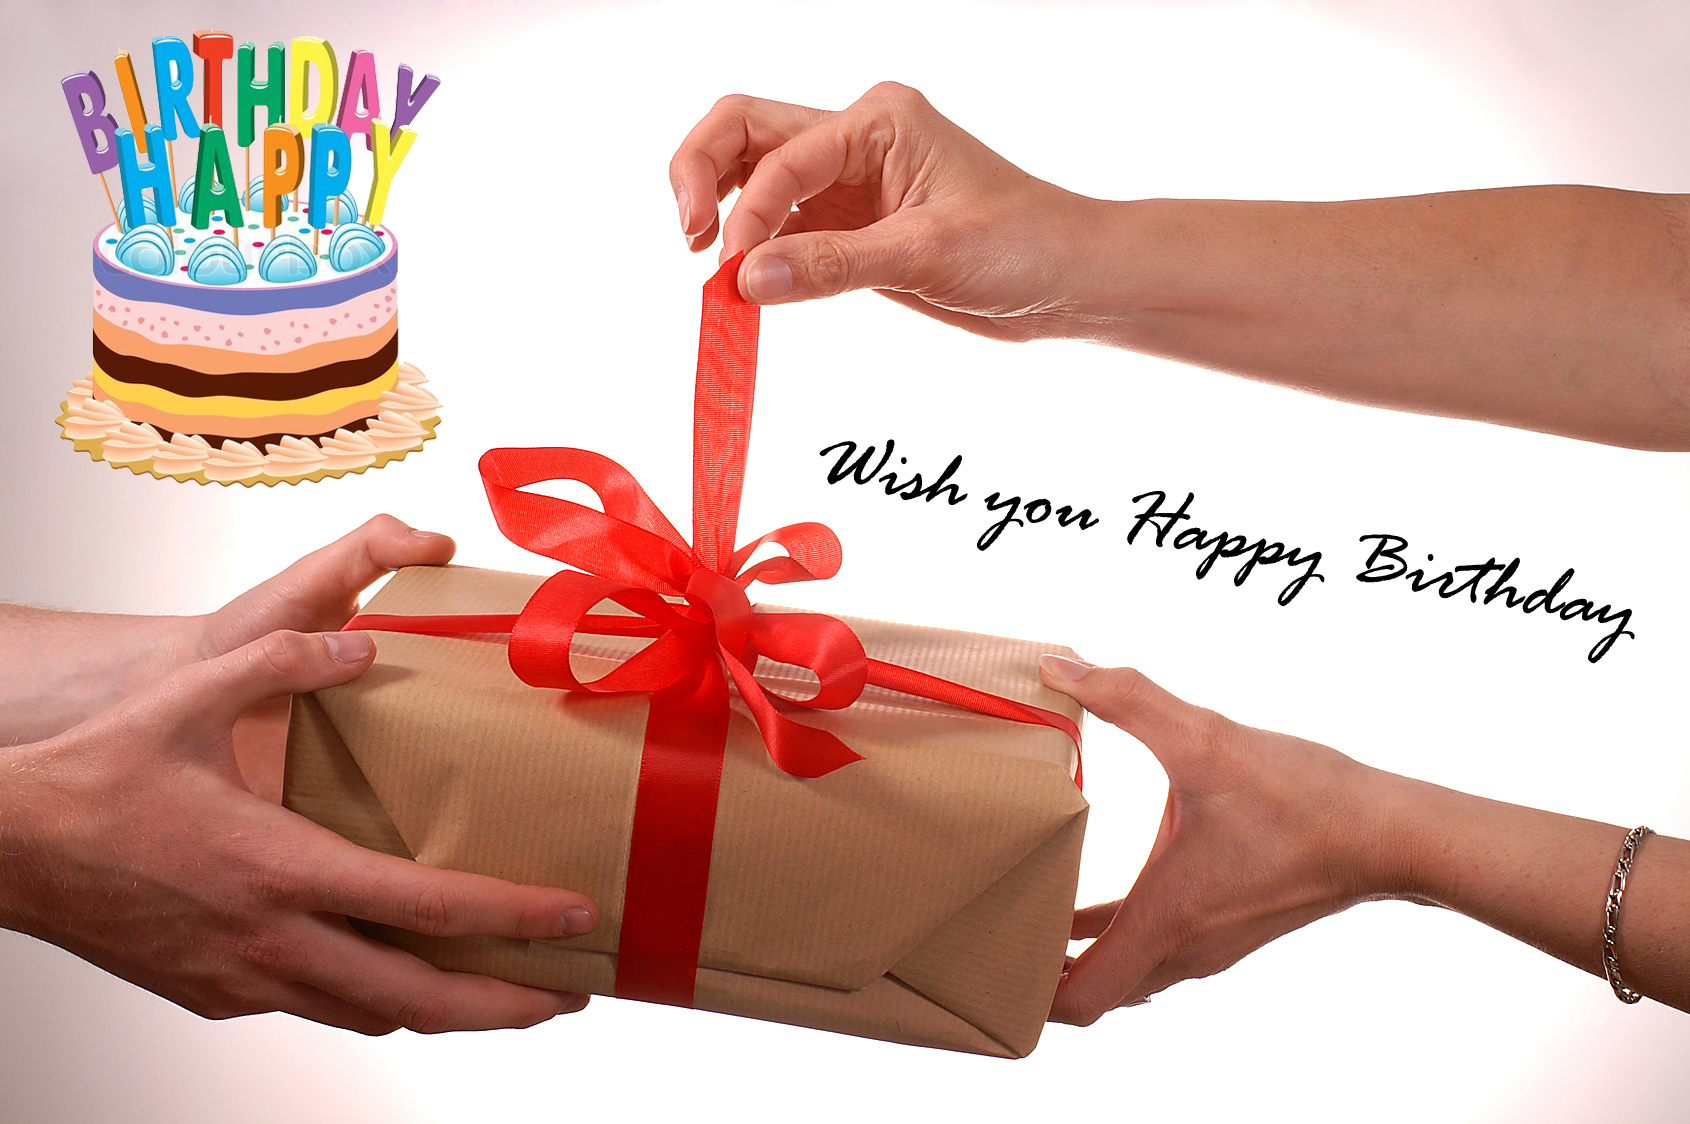 Birthday Gift Wishes Picture - Birthday Gift Pic Download - HD Wallpaper 